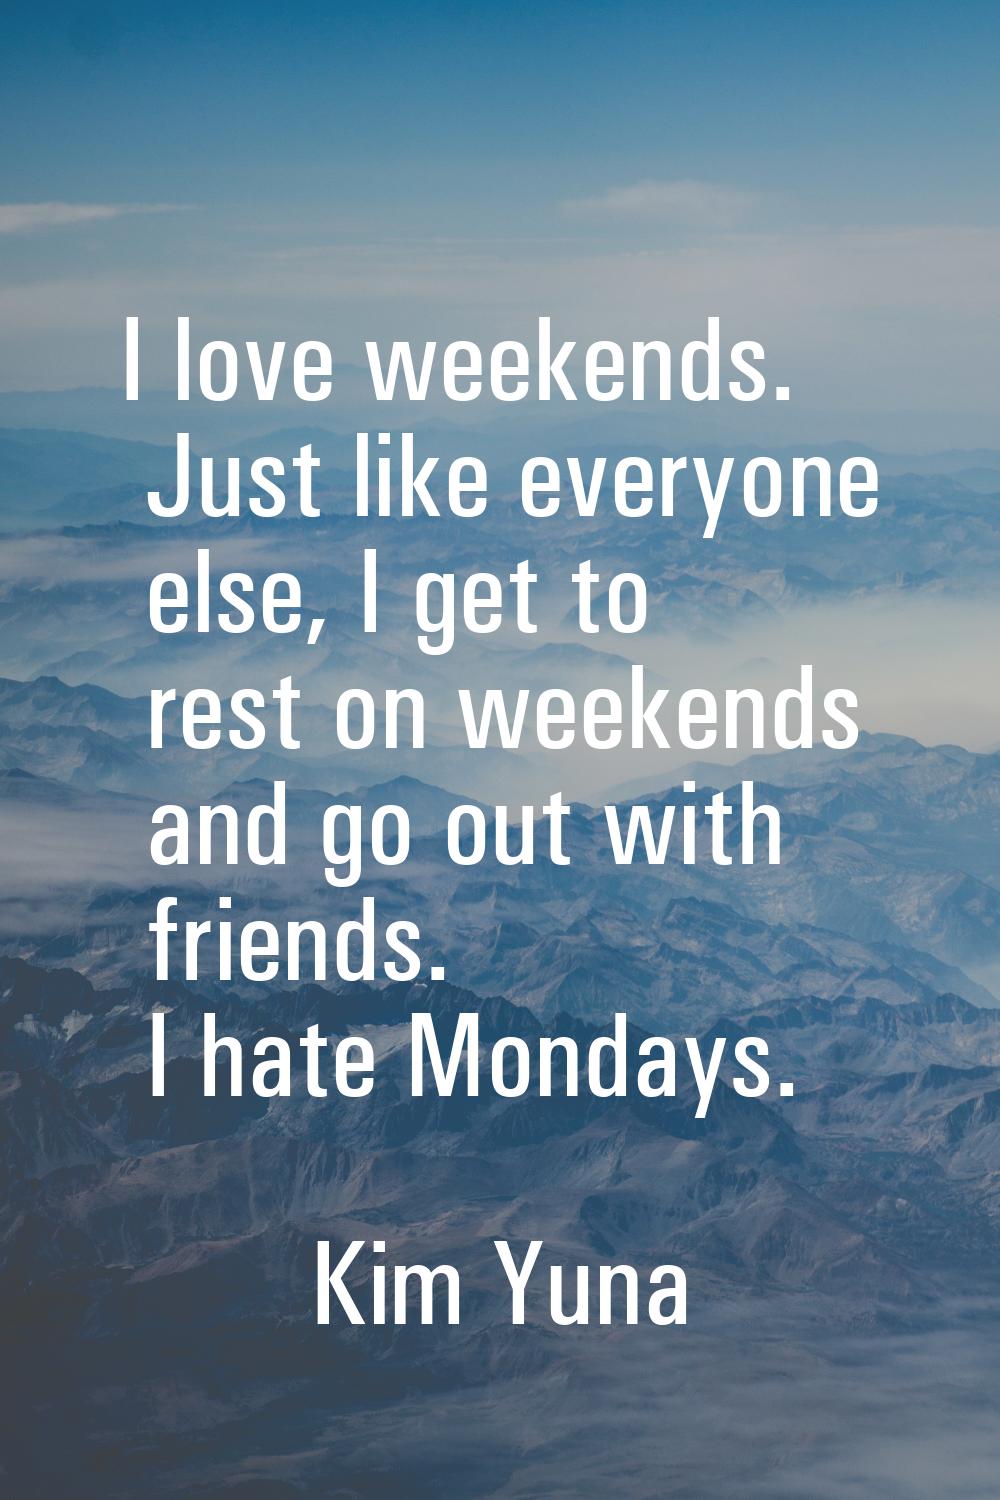 I love weekends. Just like everyone else, I get to rest on weekends and go out with friends. I hate